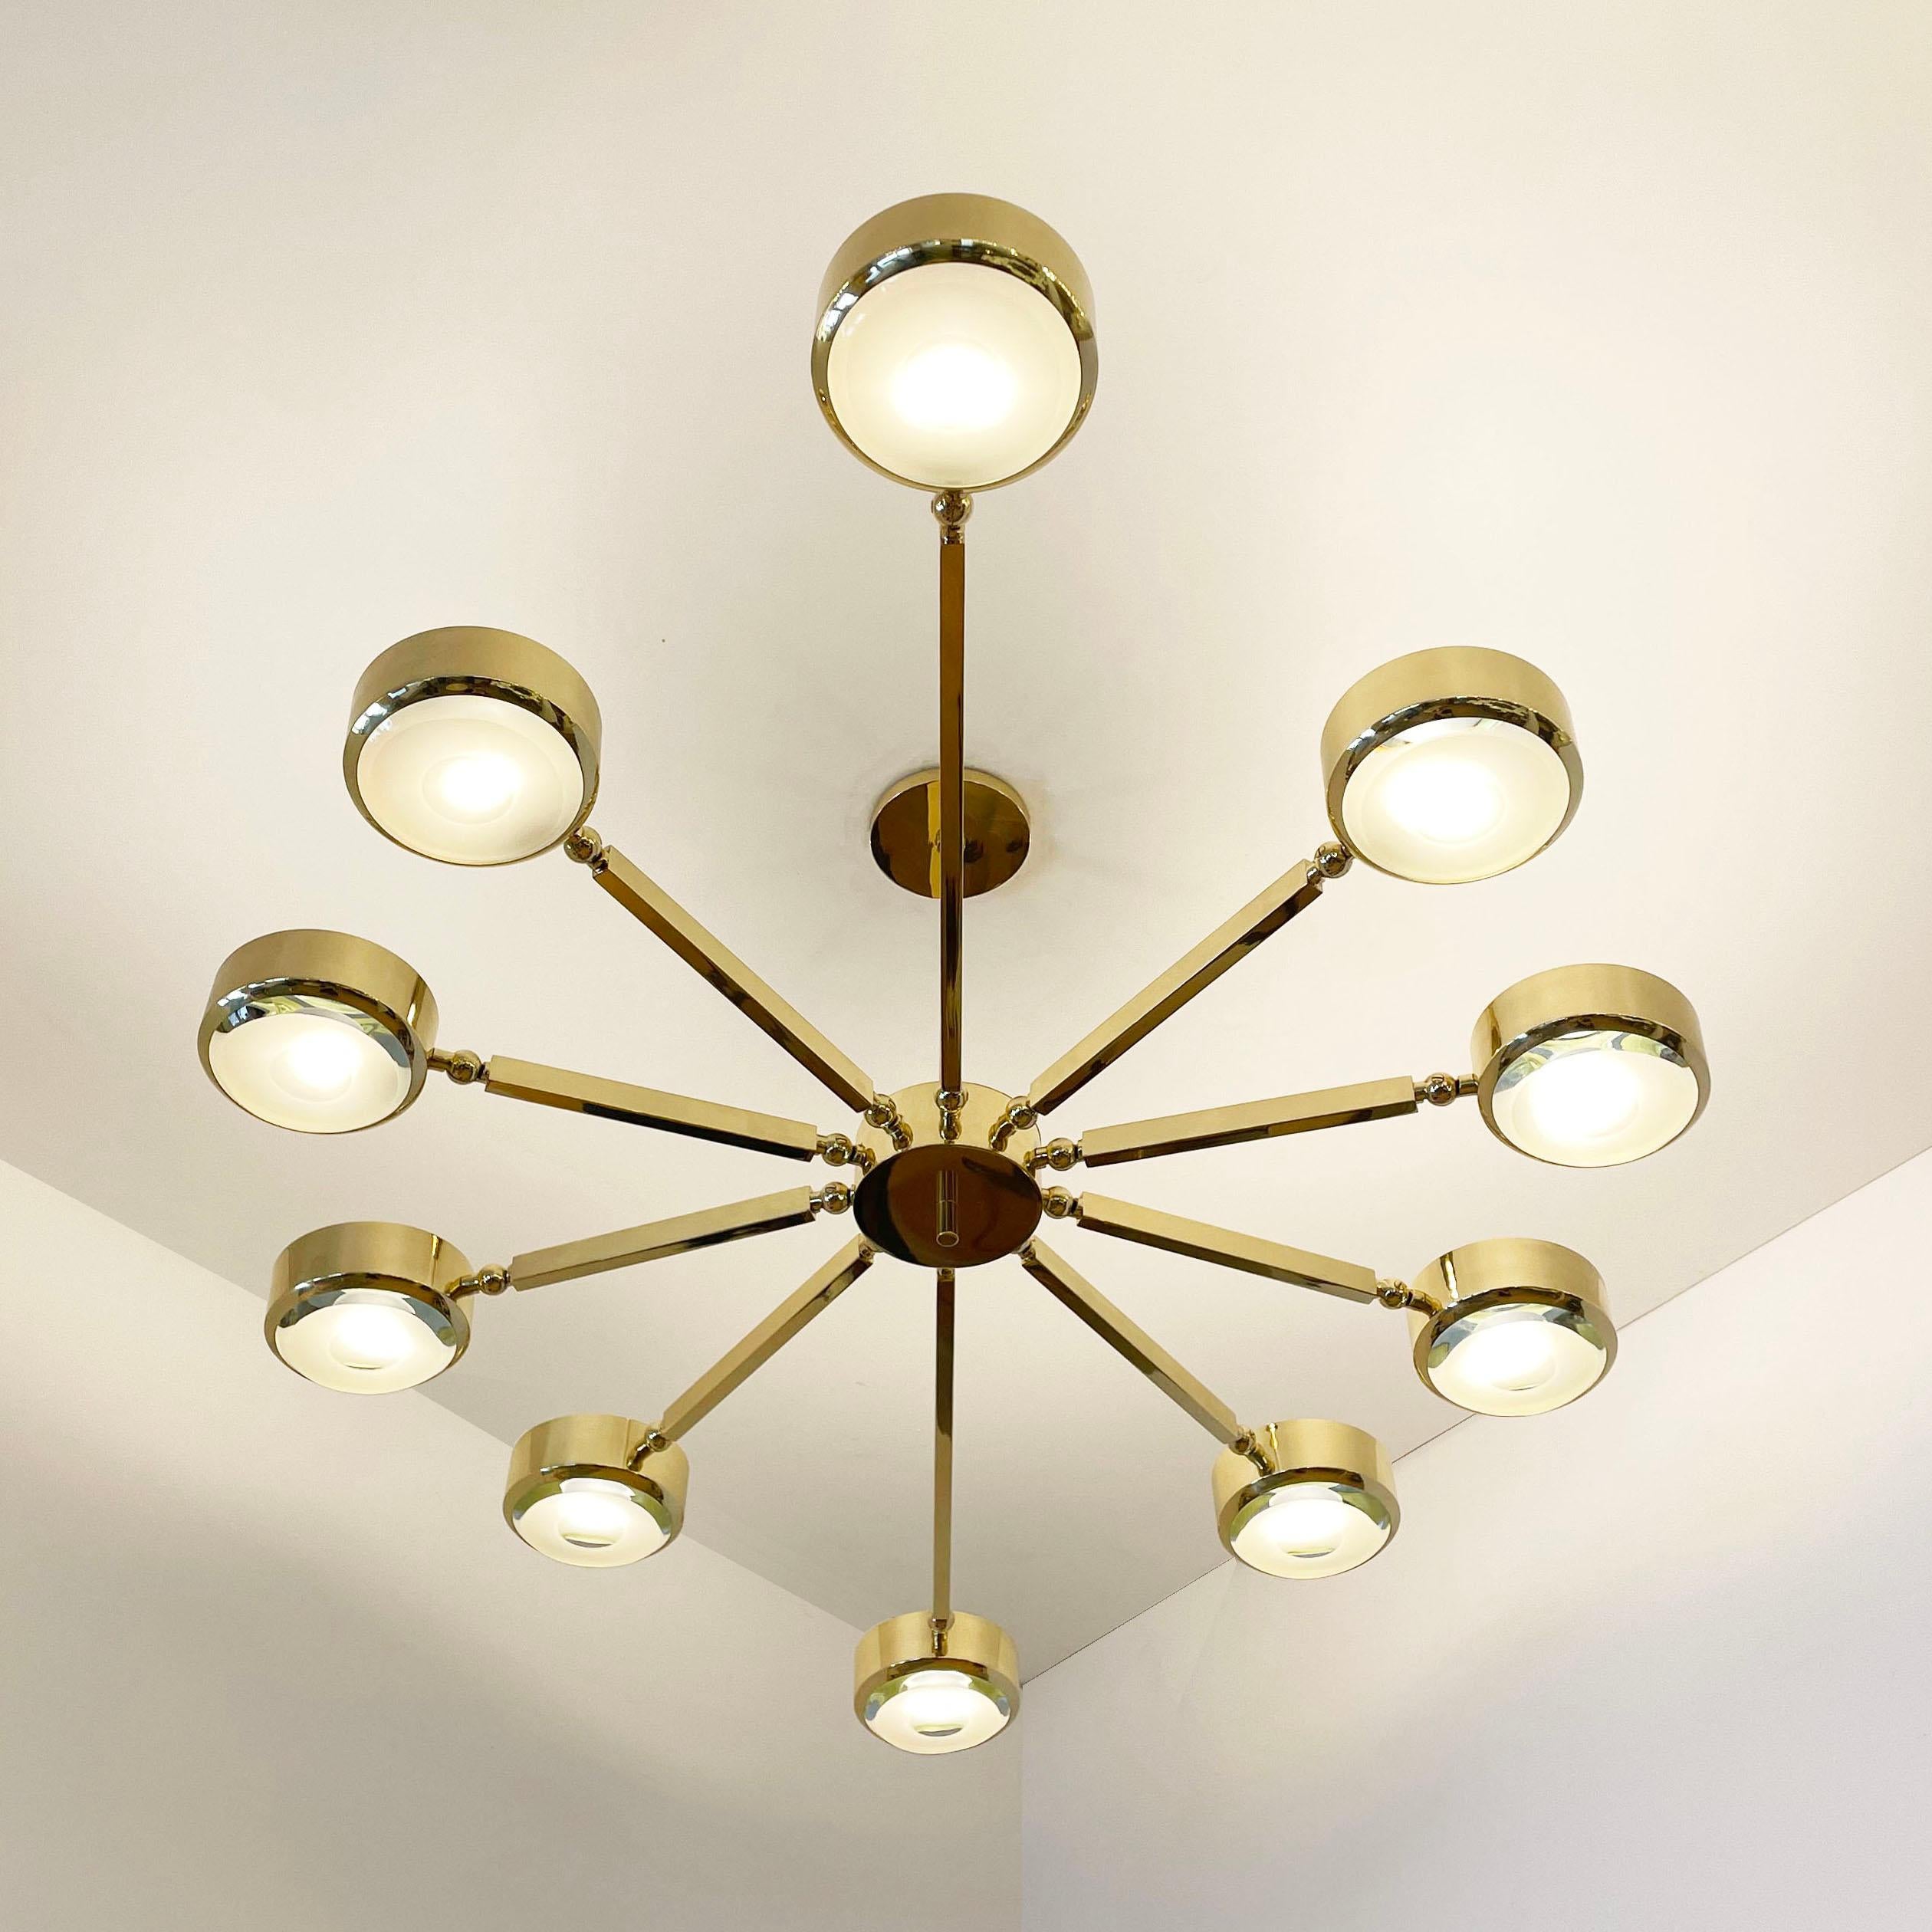 Oculus Oval Ceiling Light by Gaspare Asaro- Polished Nickel with Carved Glass For Sale 3